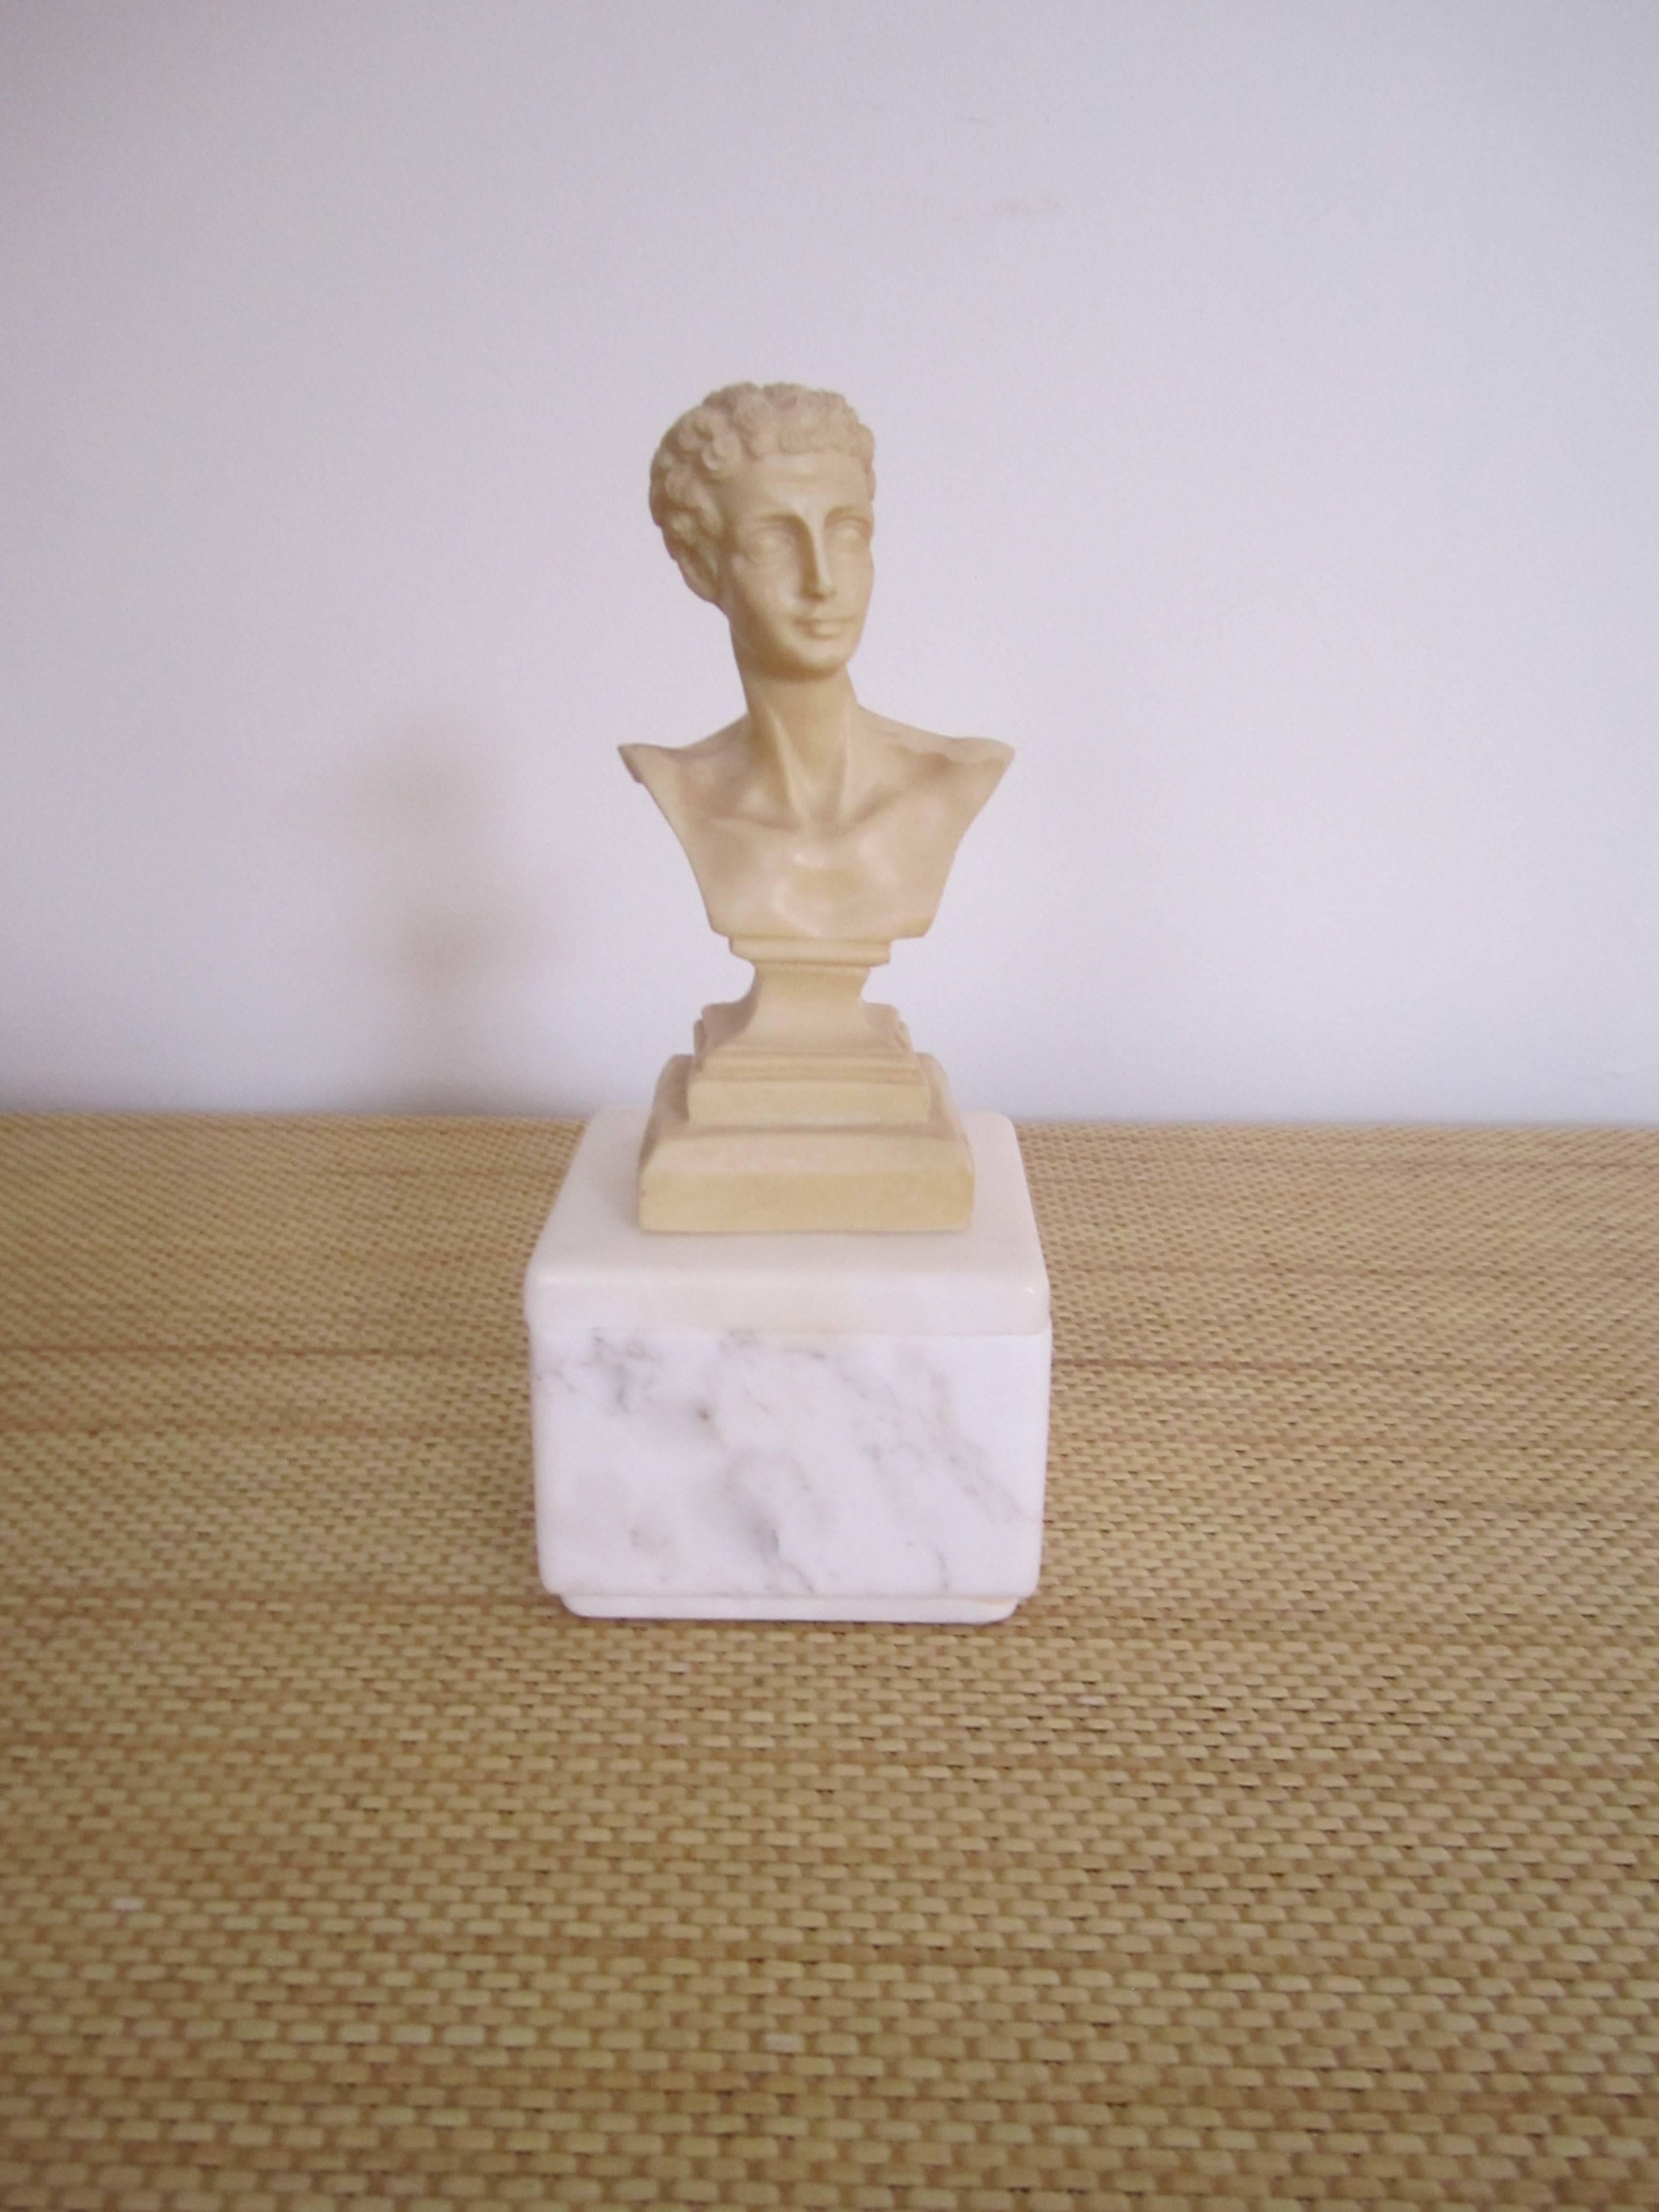 A Mid-Century classical Roman style male sculpture bust. Marked 'Made in Italy' on bottom as show in image #10.

Sculpture measures: 6